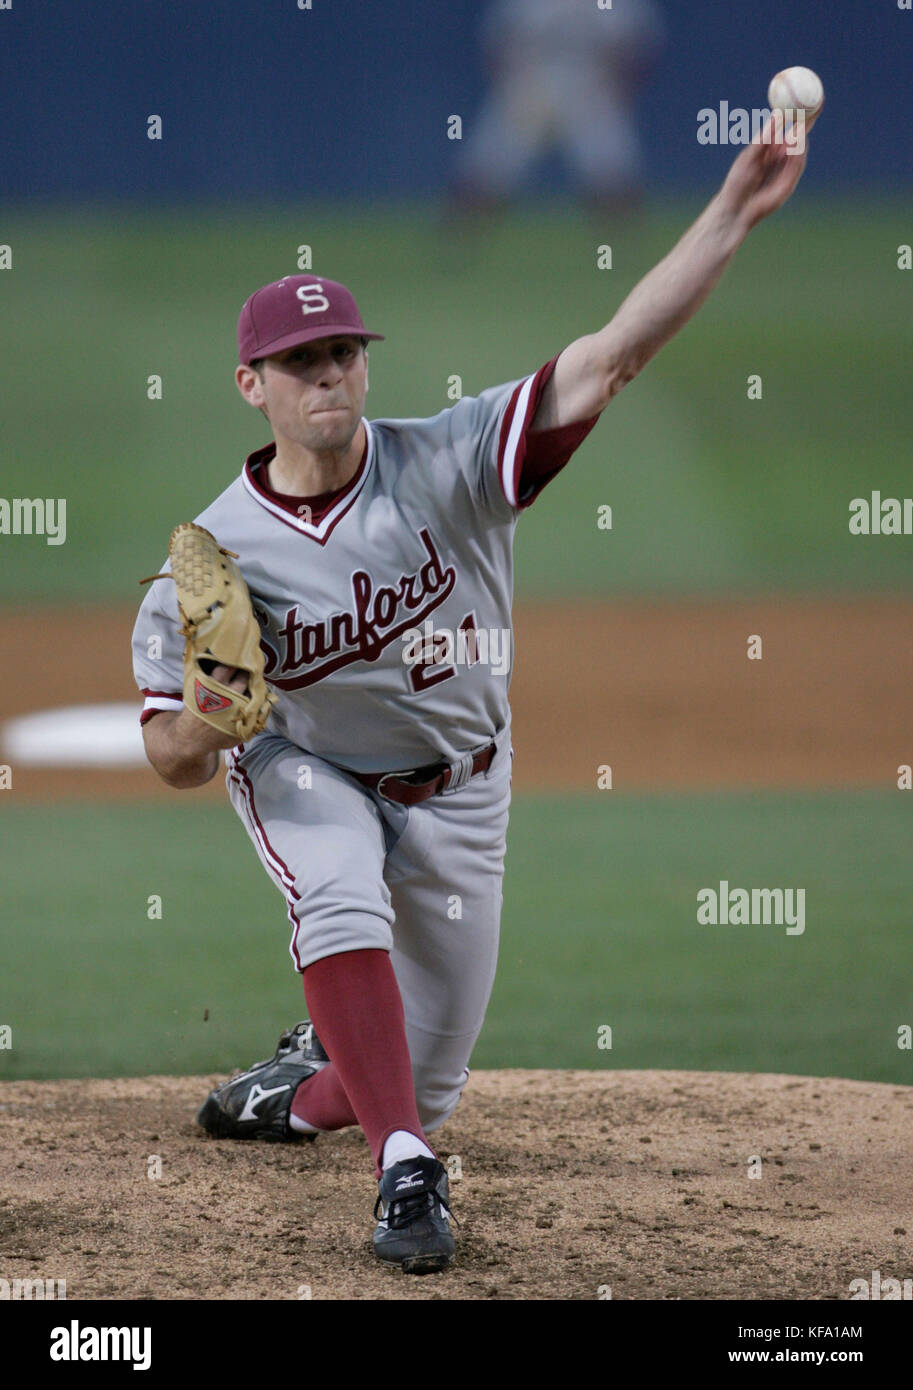 Stanford's Jeremy Bleich pitches against Cal State Fullerton during the first inning of a Super Regional NCAA college baseball game in Fullerton, Calif., on Friday, June 6, 2008. Photo by Francis Specker Stock Photo